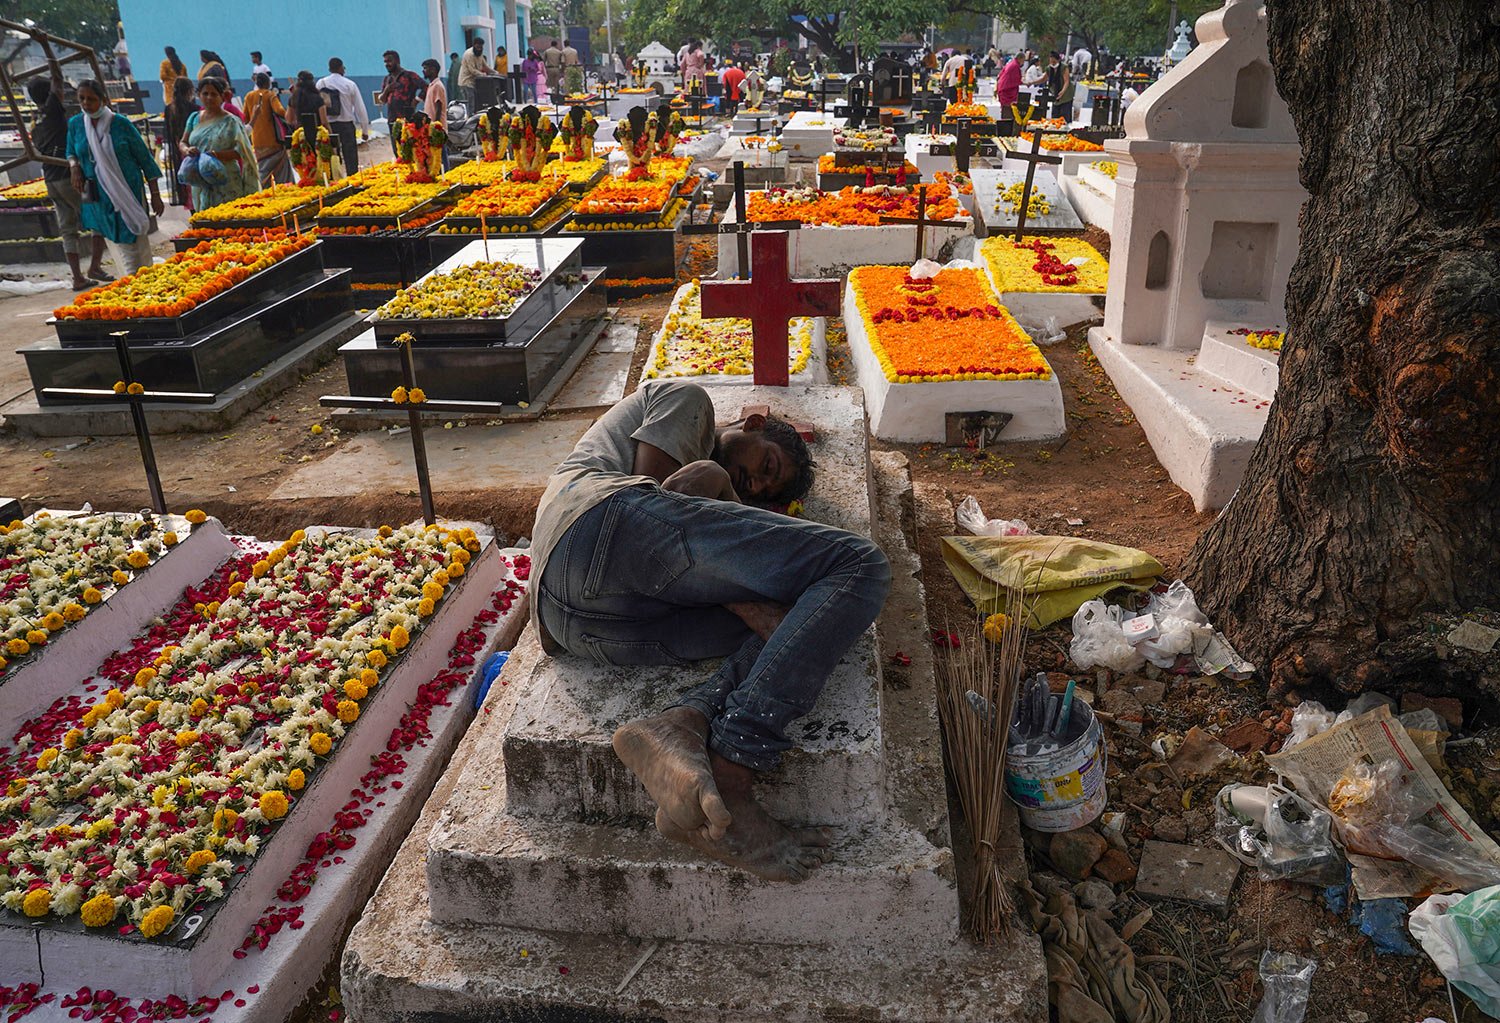  A worker rests on a grave as friends and families gather with candles and flowers to offer prayers for departed souls on All Souls' Day in Hyderabad, India, Wednesday, Nov. 2, 2022.  (AP Photo/Mahesh Kumar A.) 